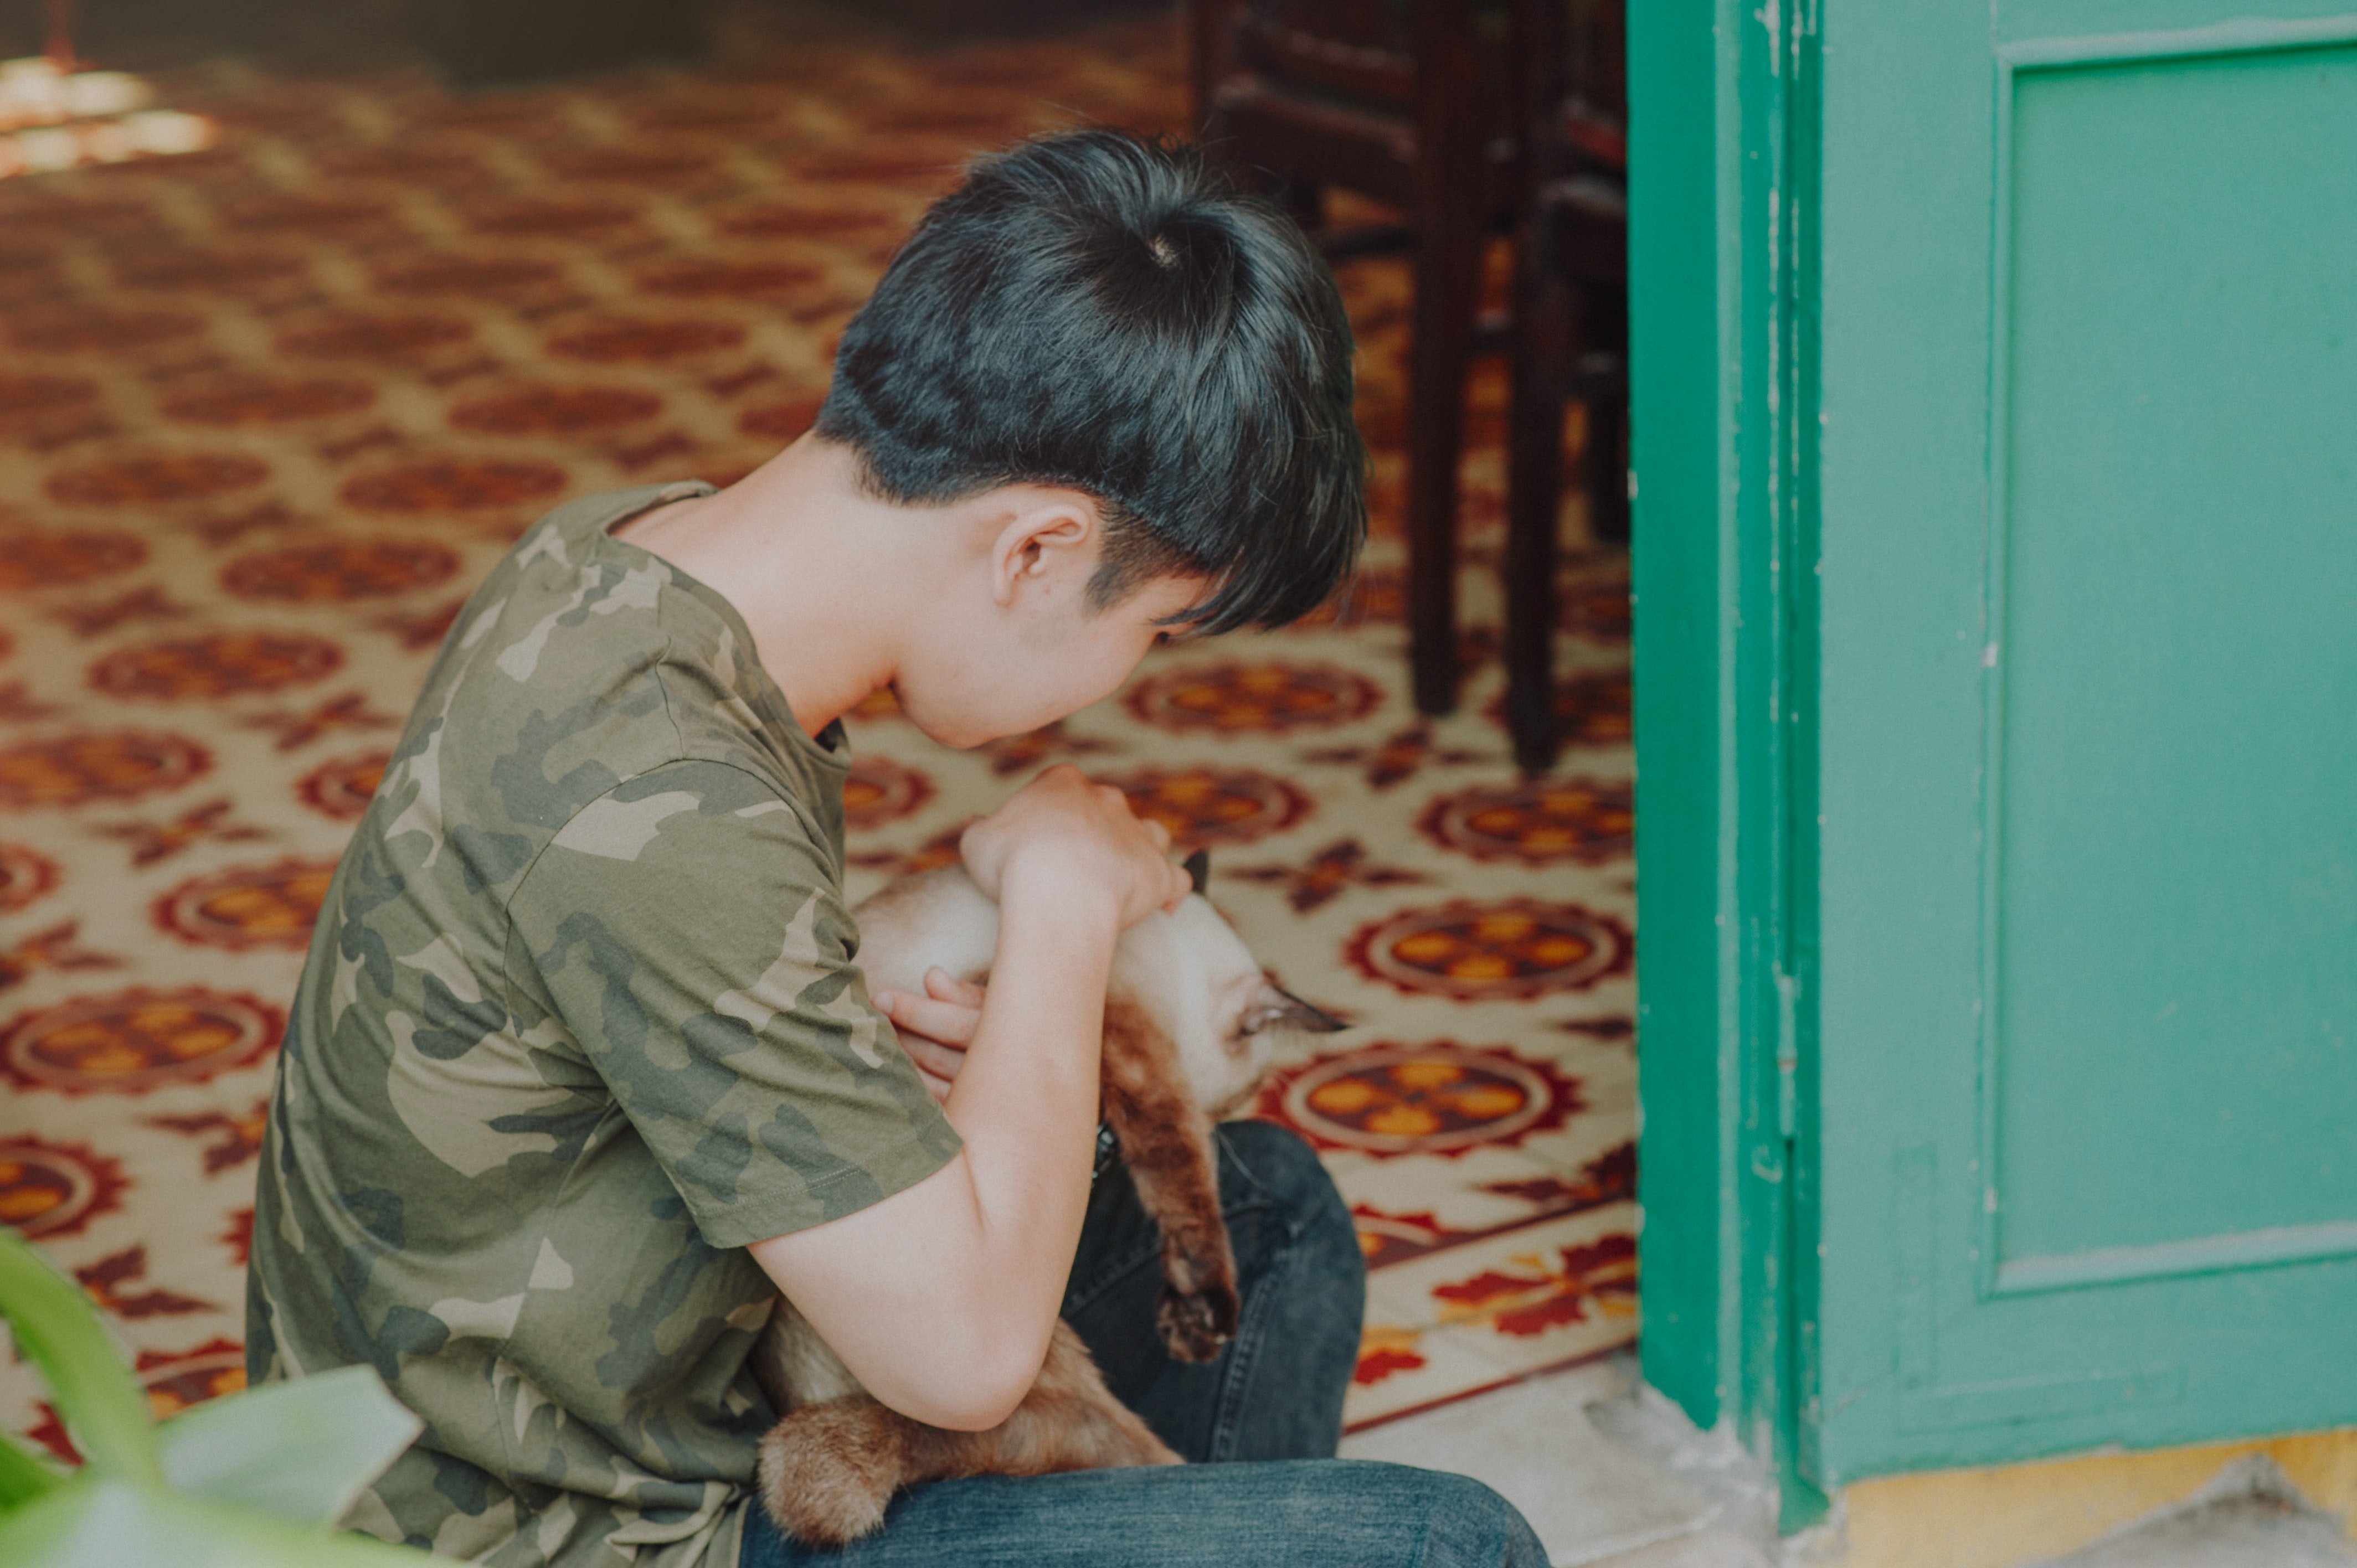 Young boy with a cat. | Source: Pexels